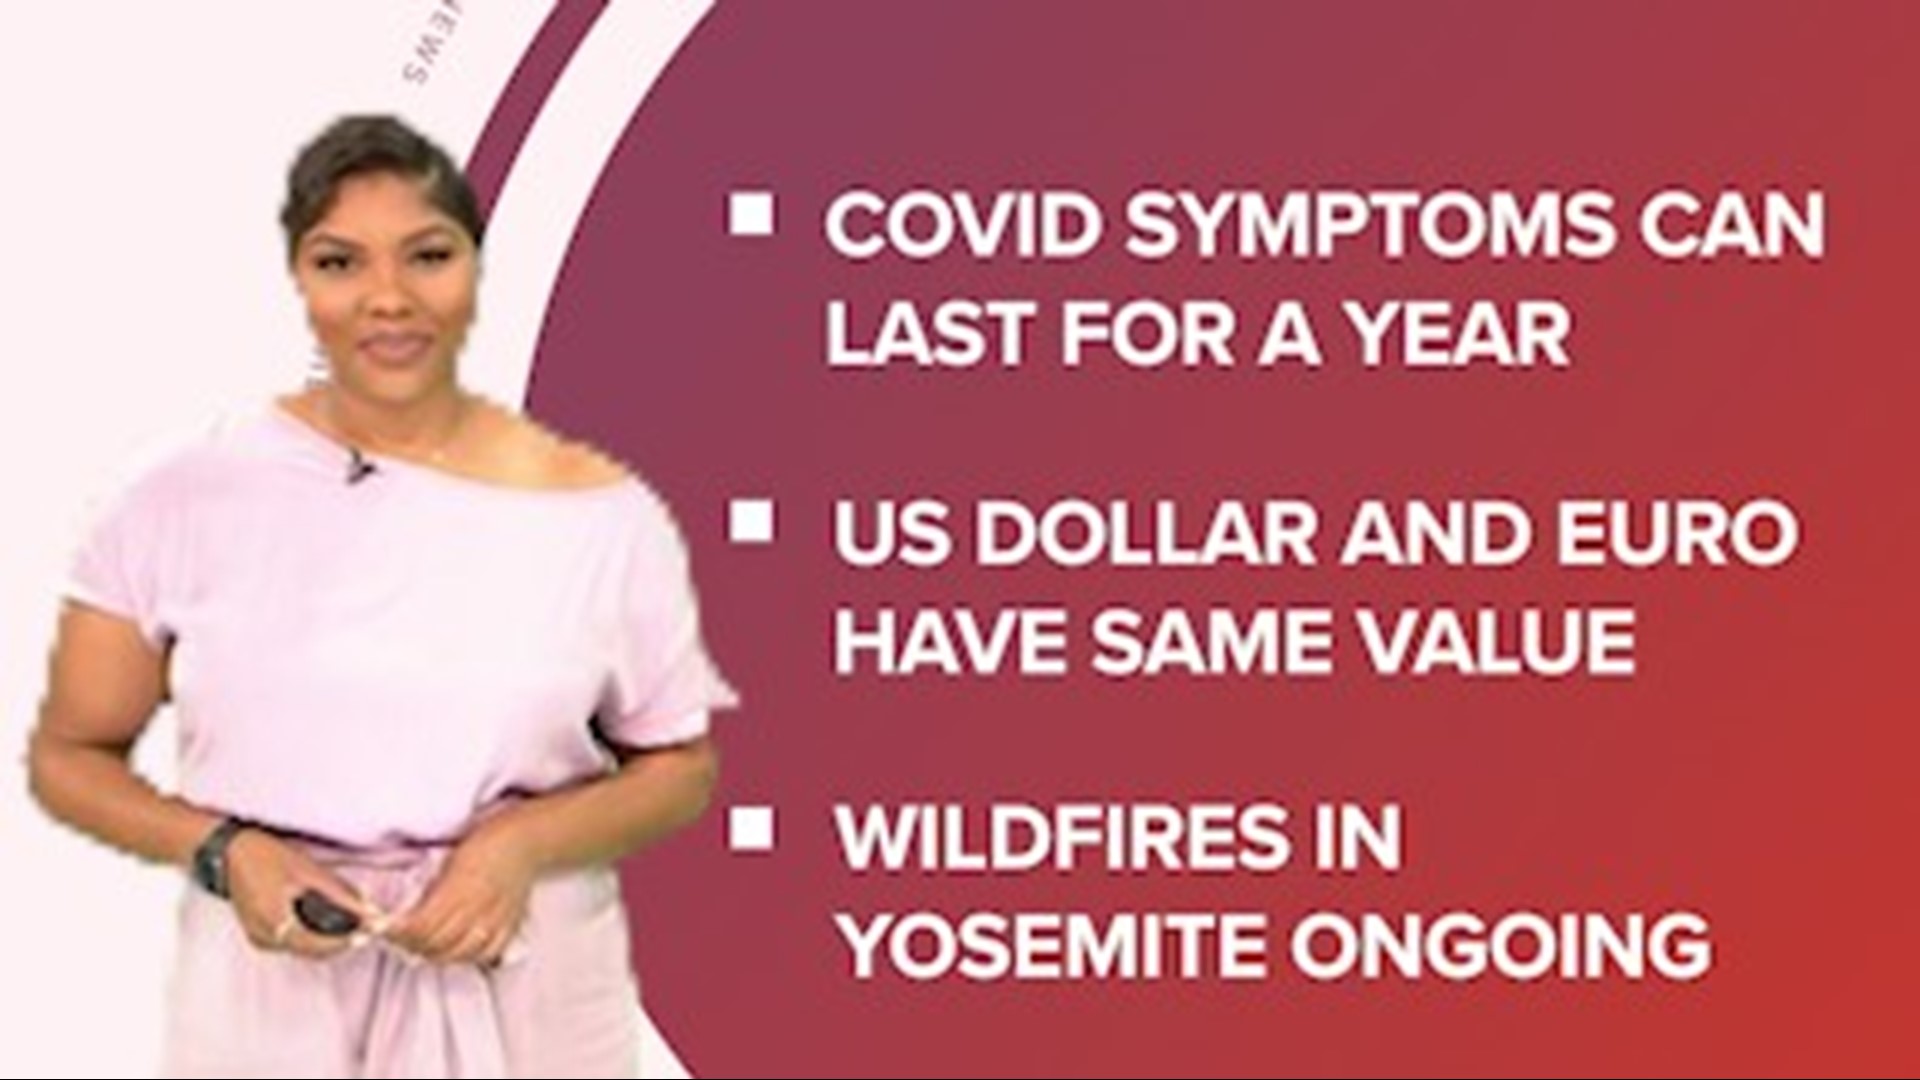 A look at what is happening in the U.S. from ongoing wildfires in Yosemite National Park, FDA considering 2nd booster shot for all and equal value for dollar, euro.